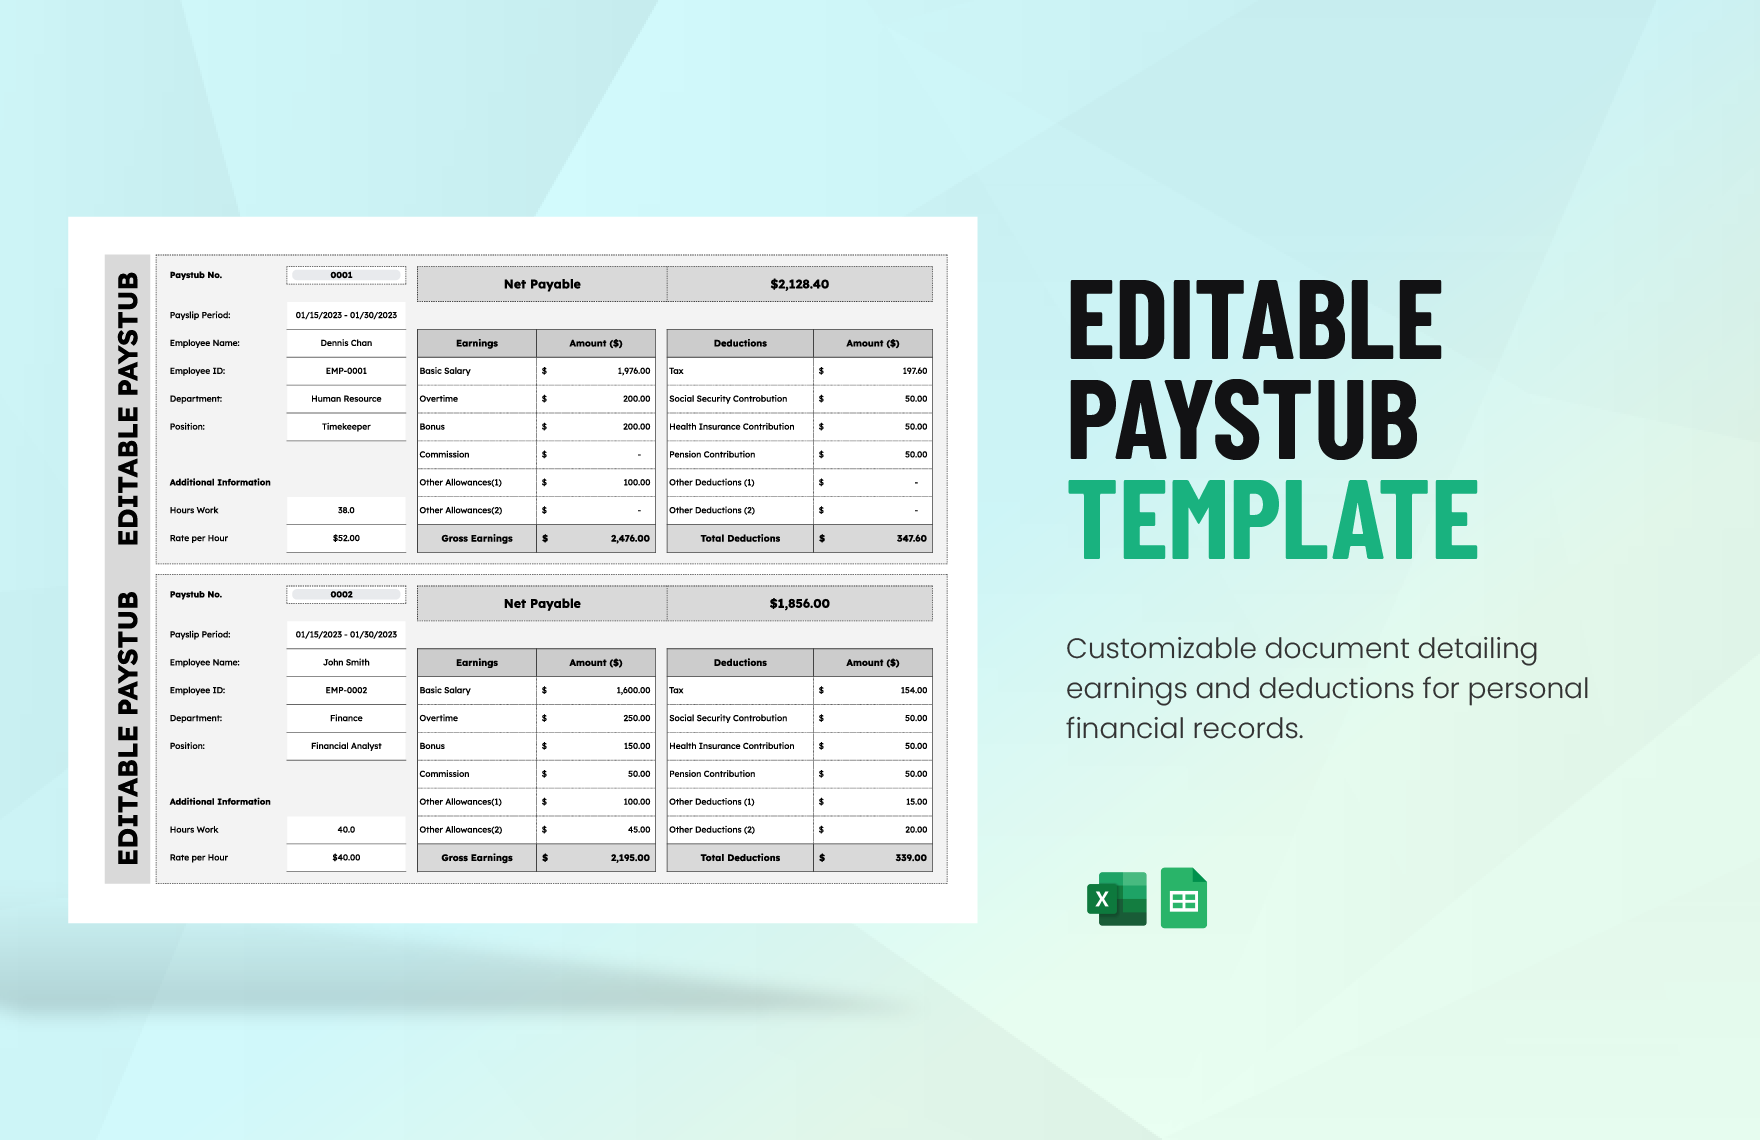 Editable Paystub Template in Excel, Google Sheets